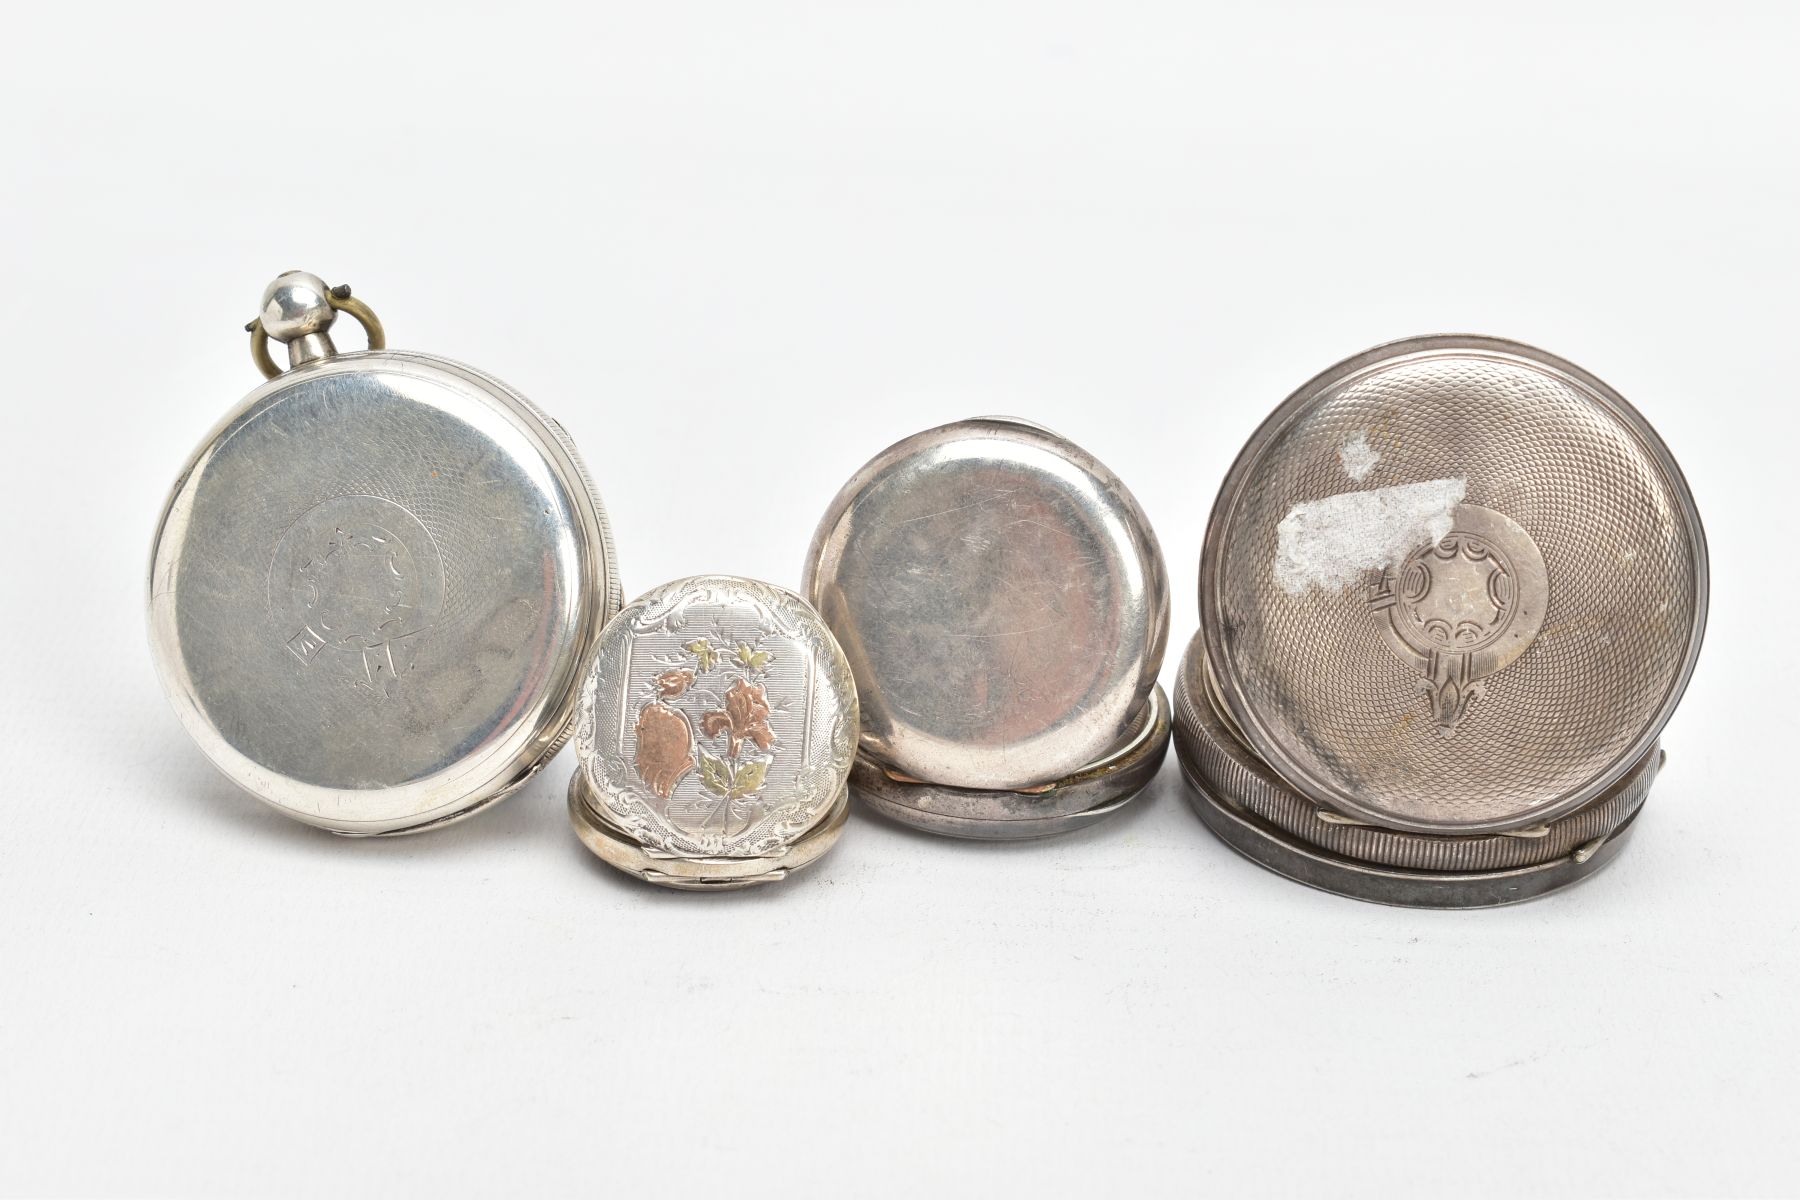 TWO OPEN FACE POCKET WATCHES, A POCKET WATCH CASE AND A SMALLER LADYS POCKET WATCH, to include a - Image 2 of 4